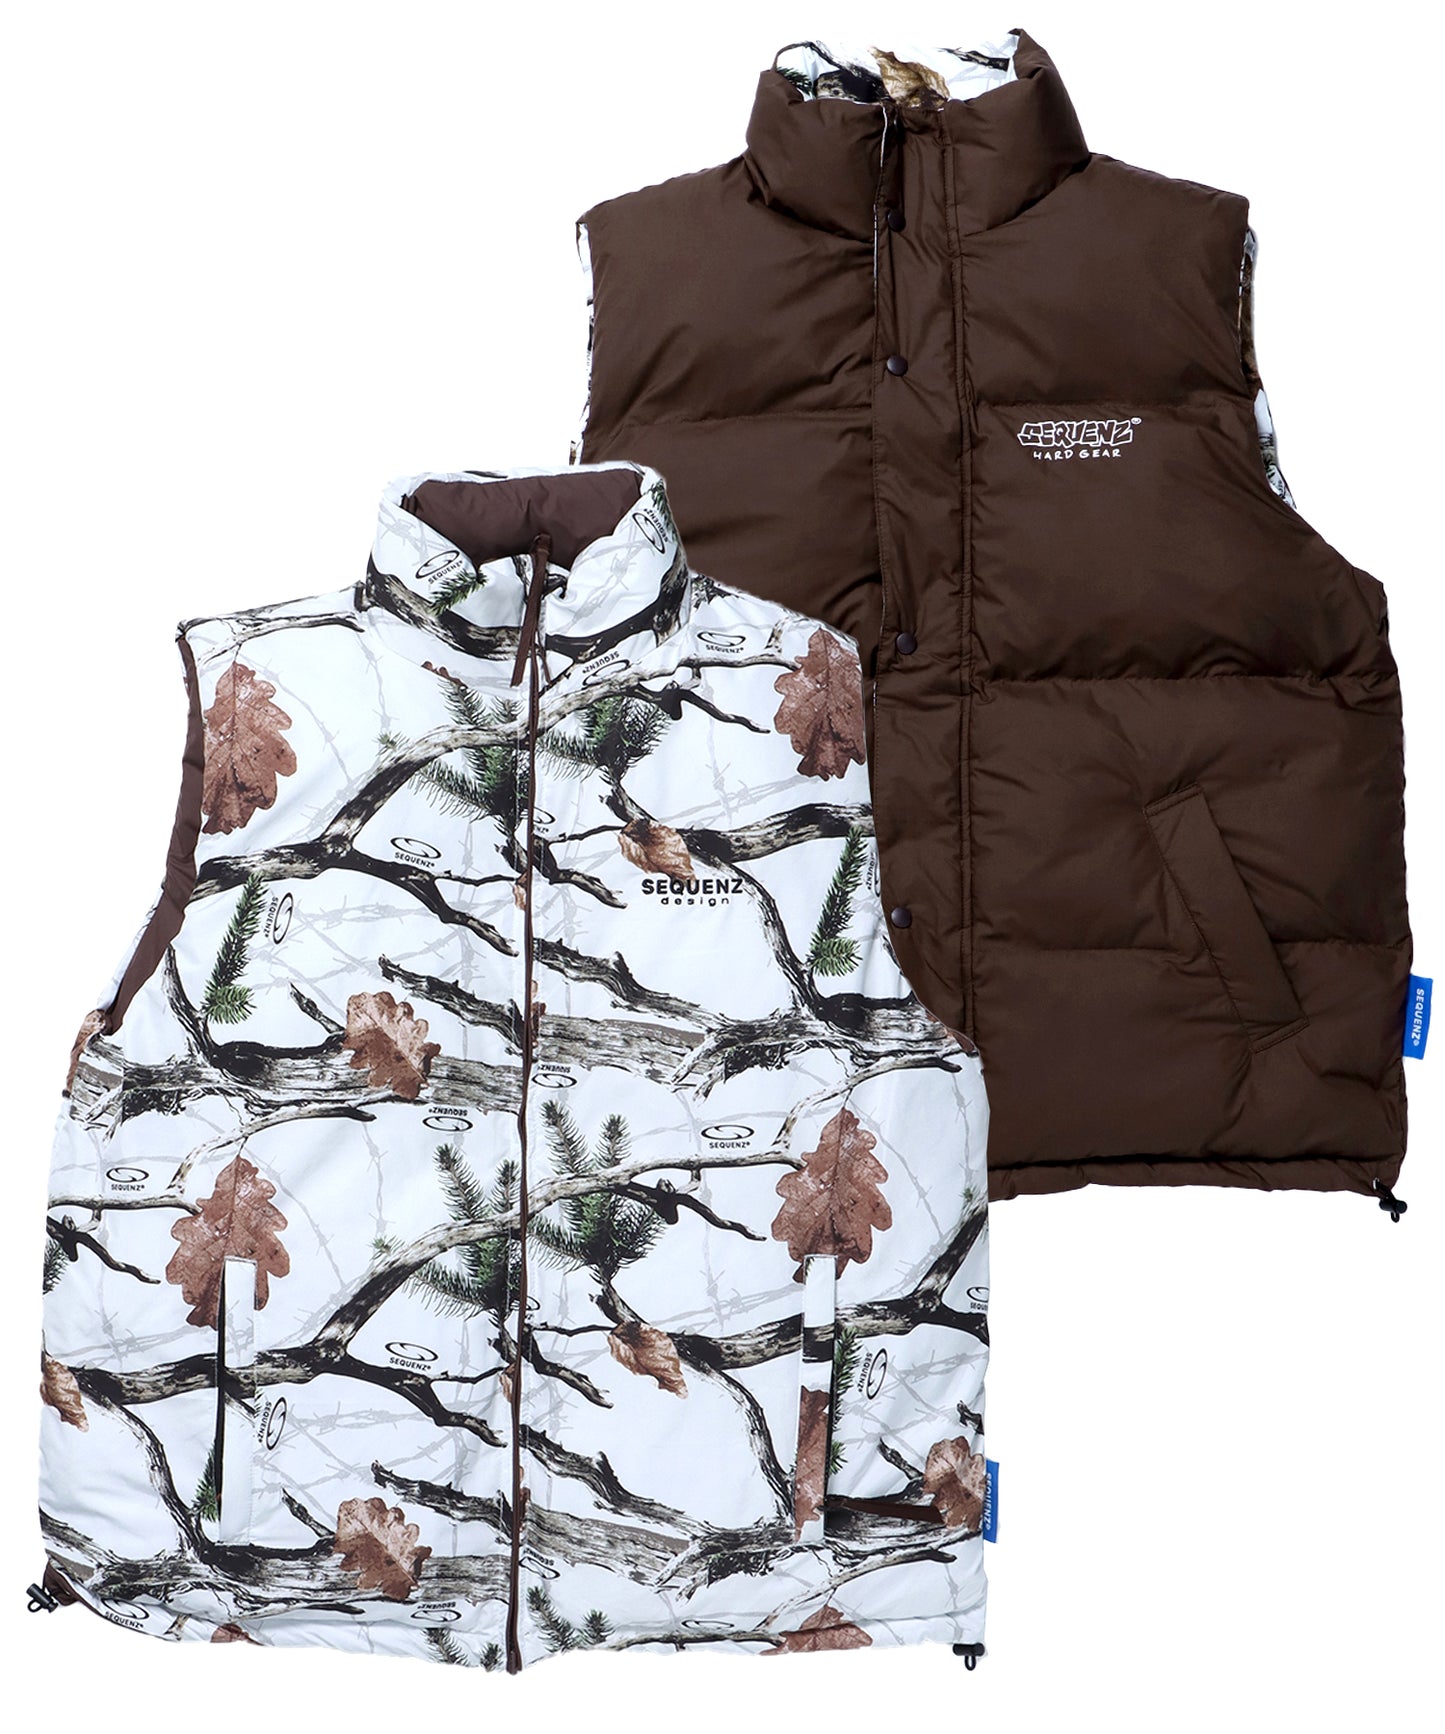 【SEQUENZ】 REVERSIBLE SYNTHETIC DOWN VEST / リバーシブル ワンポイント ロゴ ナイロン スタンド ベスト REAL TREE×BROWN